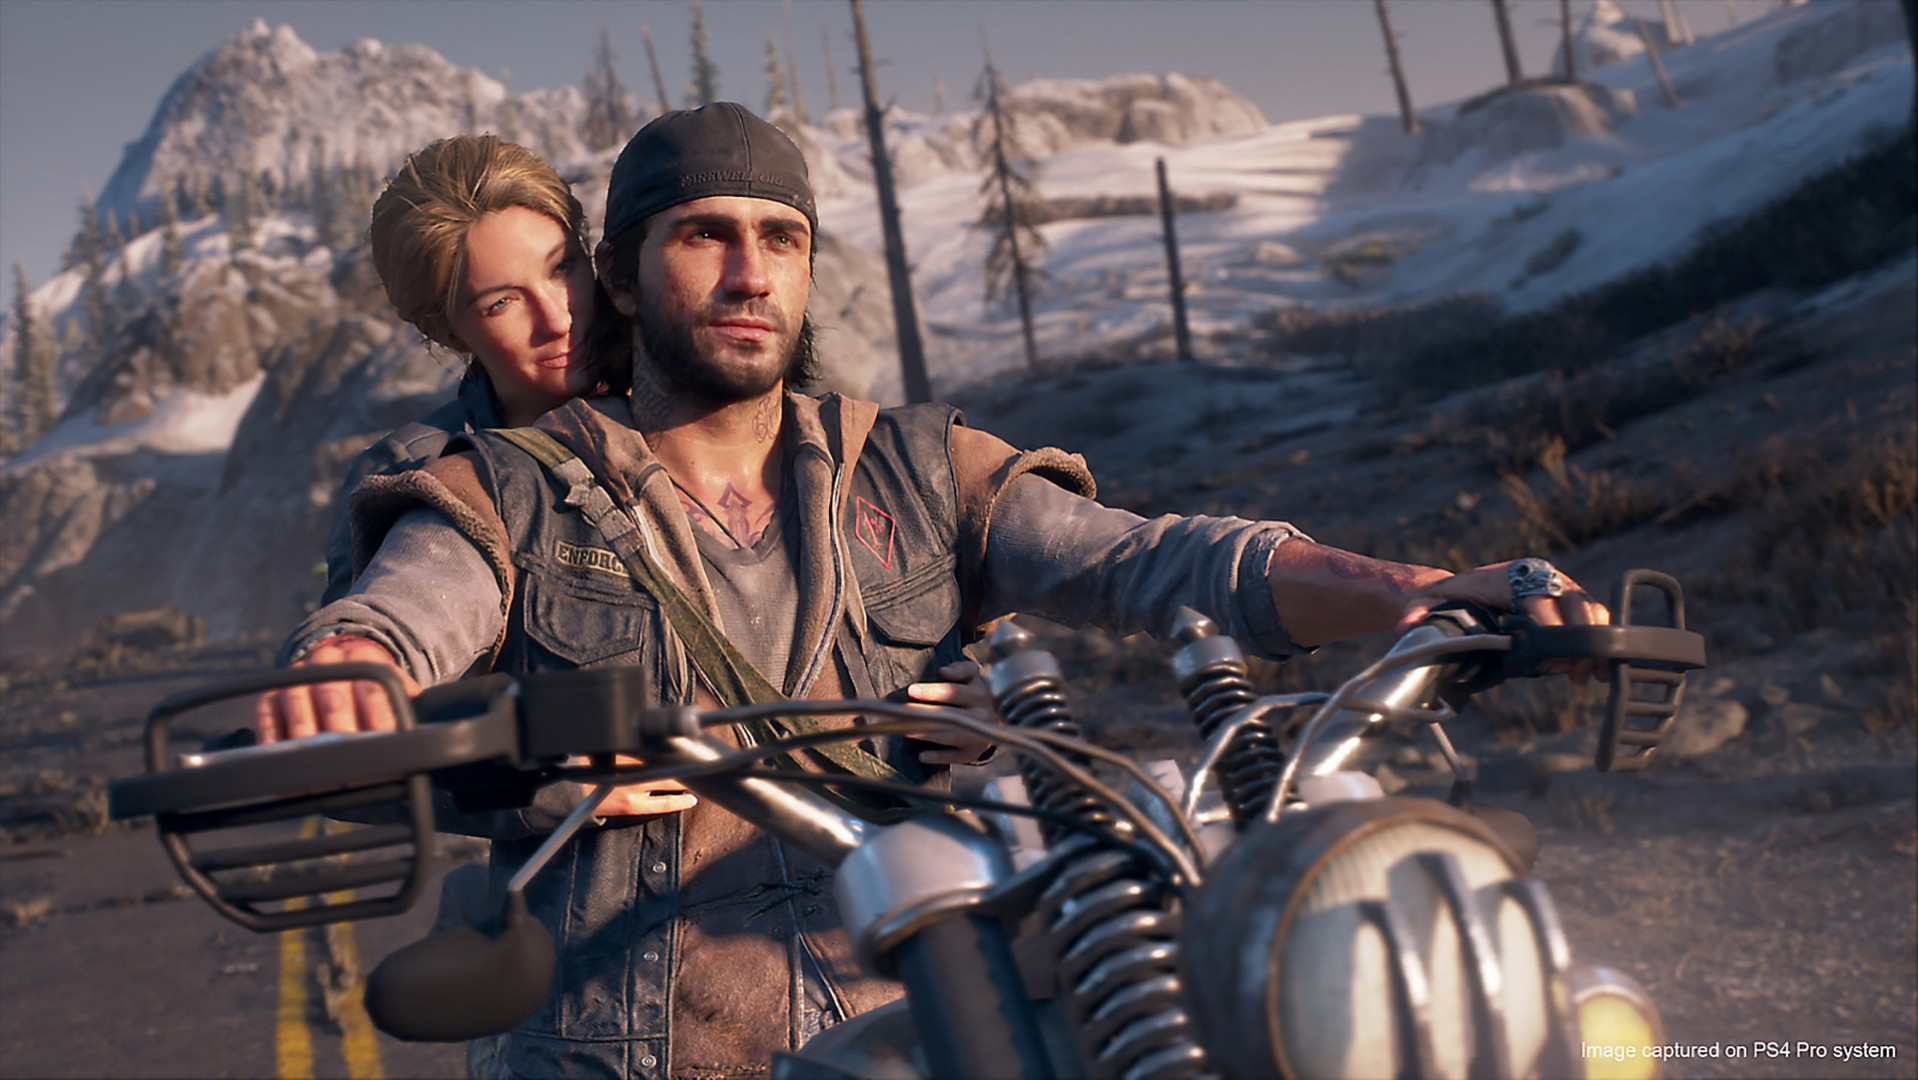 Days Gone is coming to PC on May 18th with improved graphics and